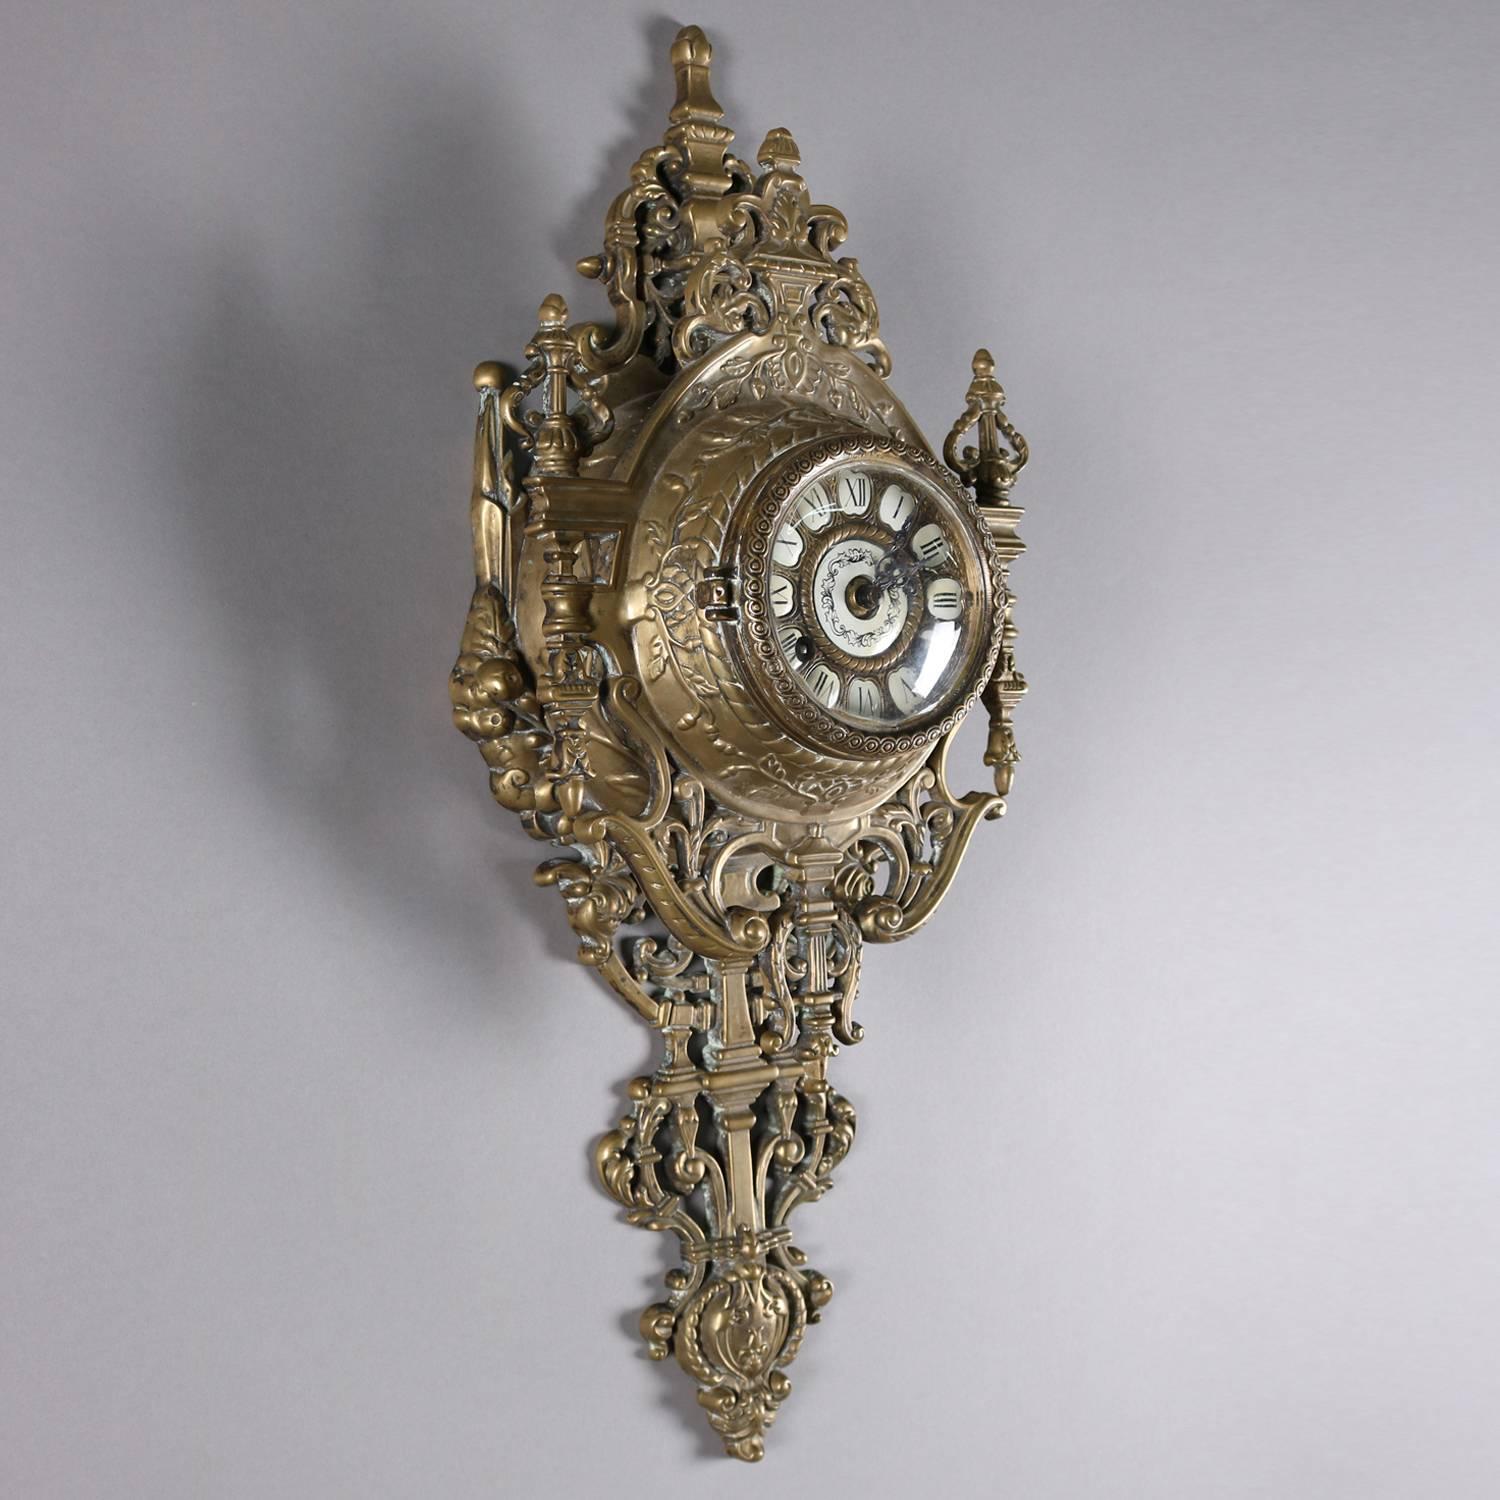 French Louis XIV style cartel wall clock by Tiffany & Co. features pierced scroll and foliate gilt bronze case with porcelain face having Roman numerals, en verso signed/stamped Tiffany & Co., clock in working condition, chimes and with key, 20th